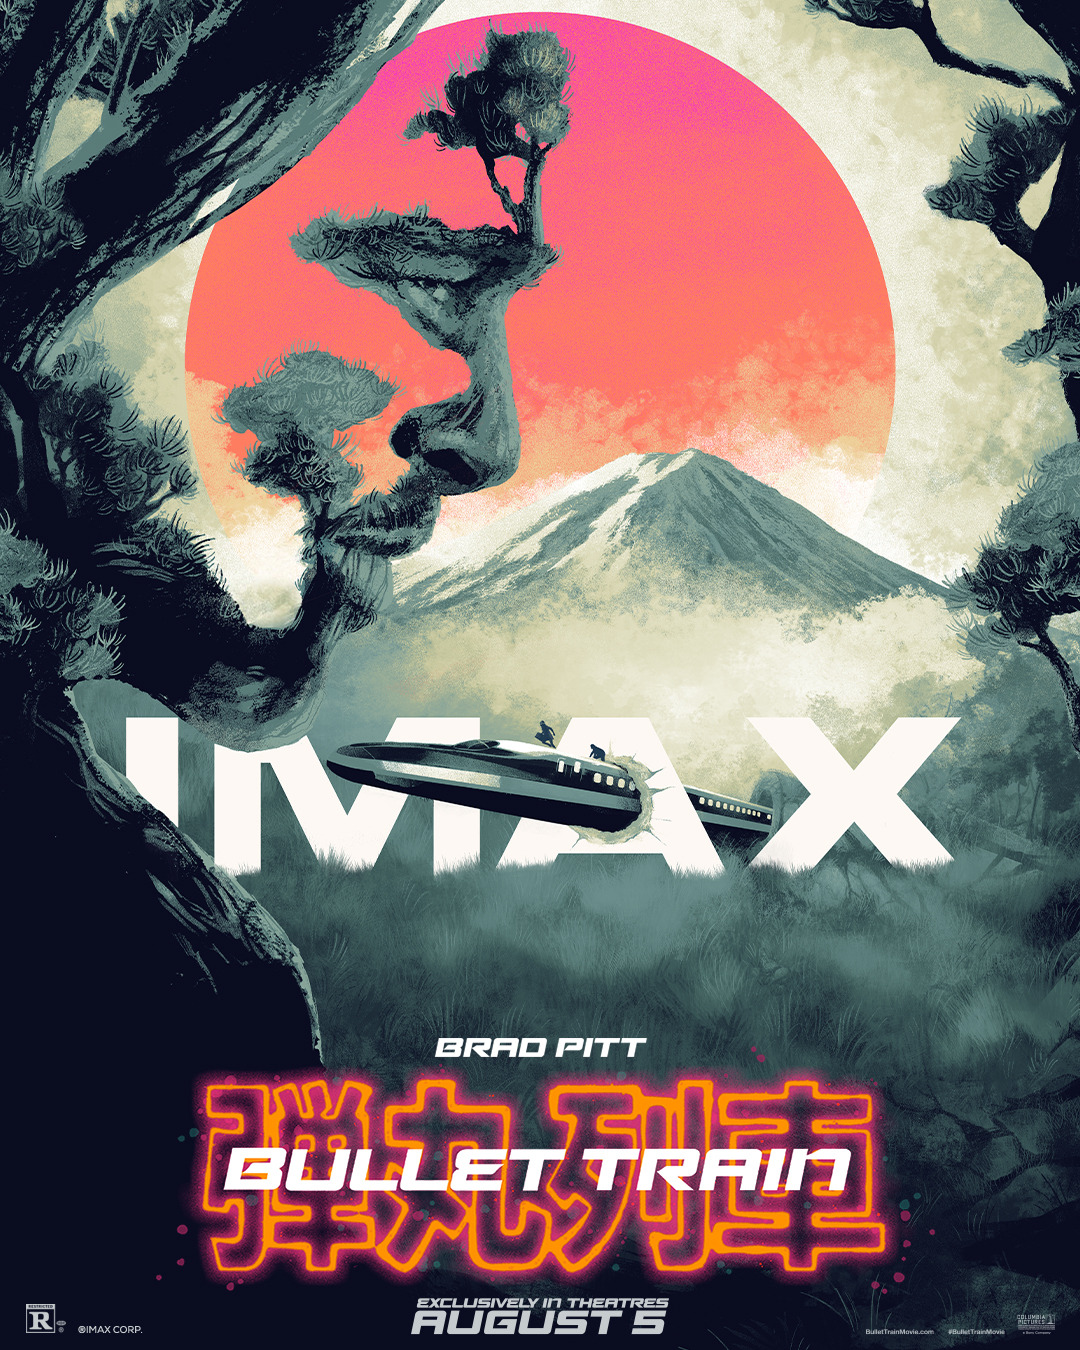 Extra Large Movie Poster Image for Bullet Train (#20 of 21)